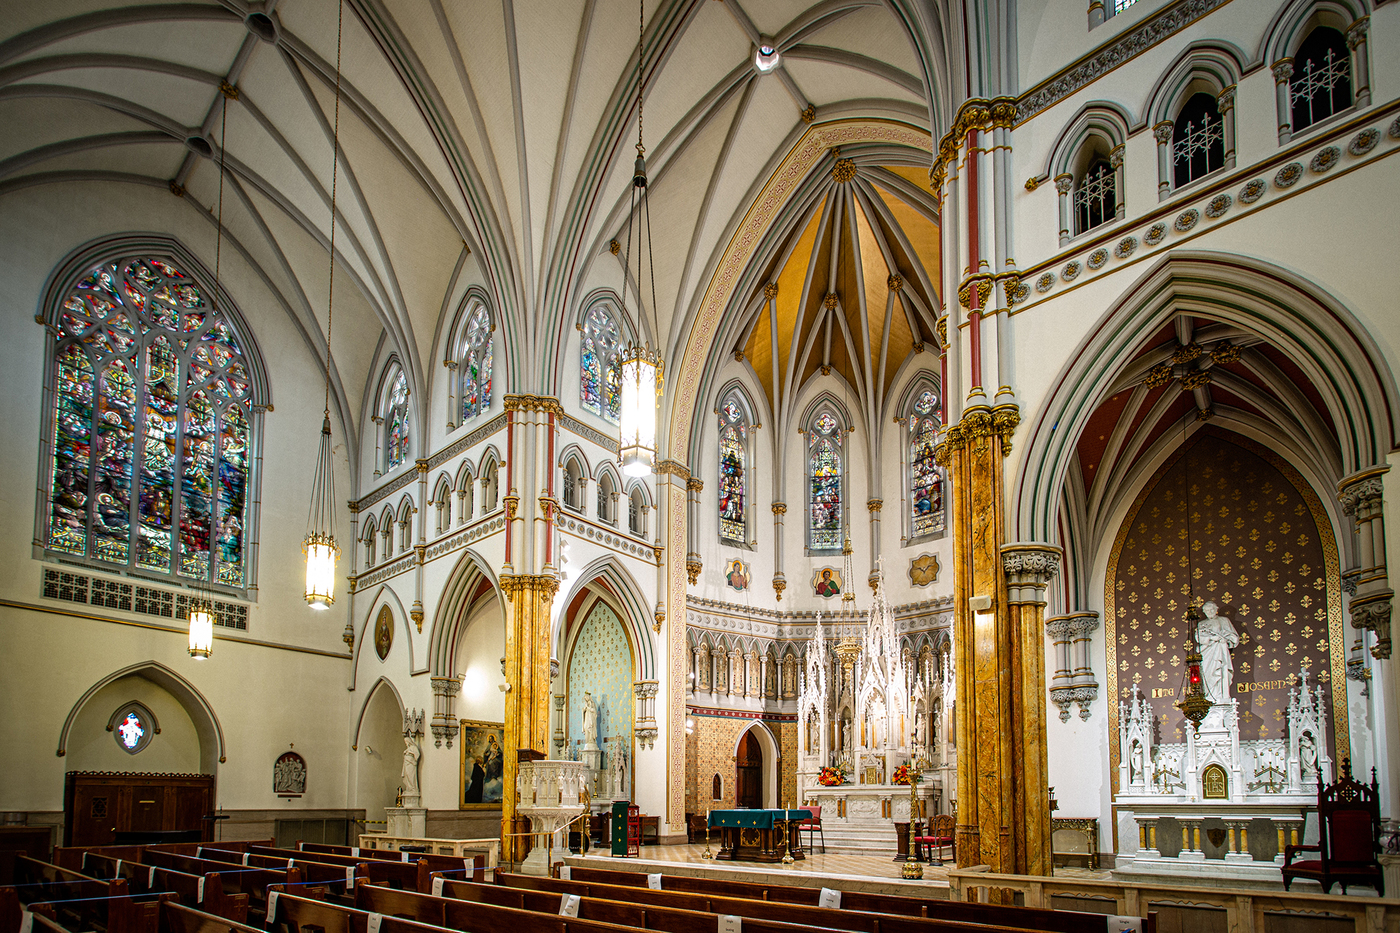 interior of the nave at St. Francis Xavier church in Park Slope, Brooklyn